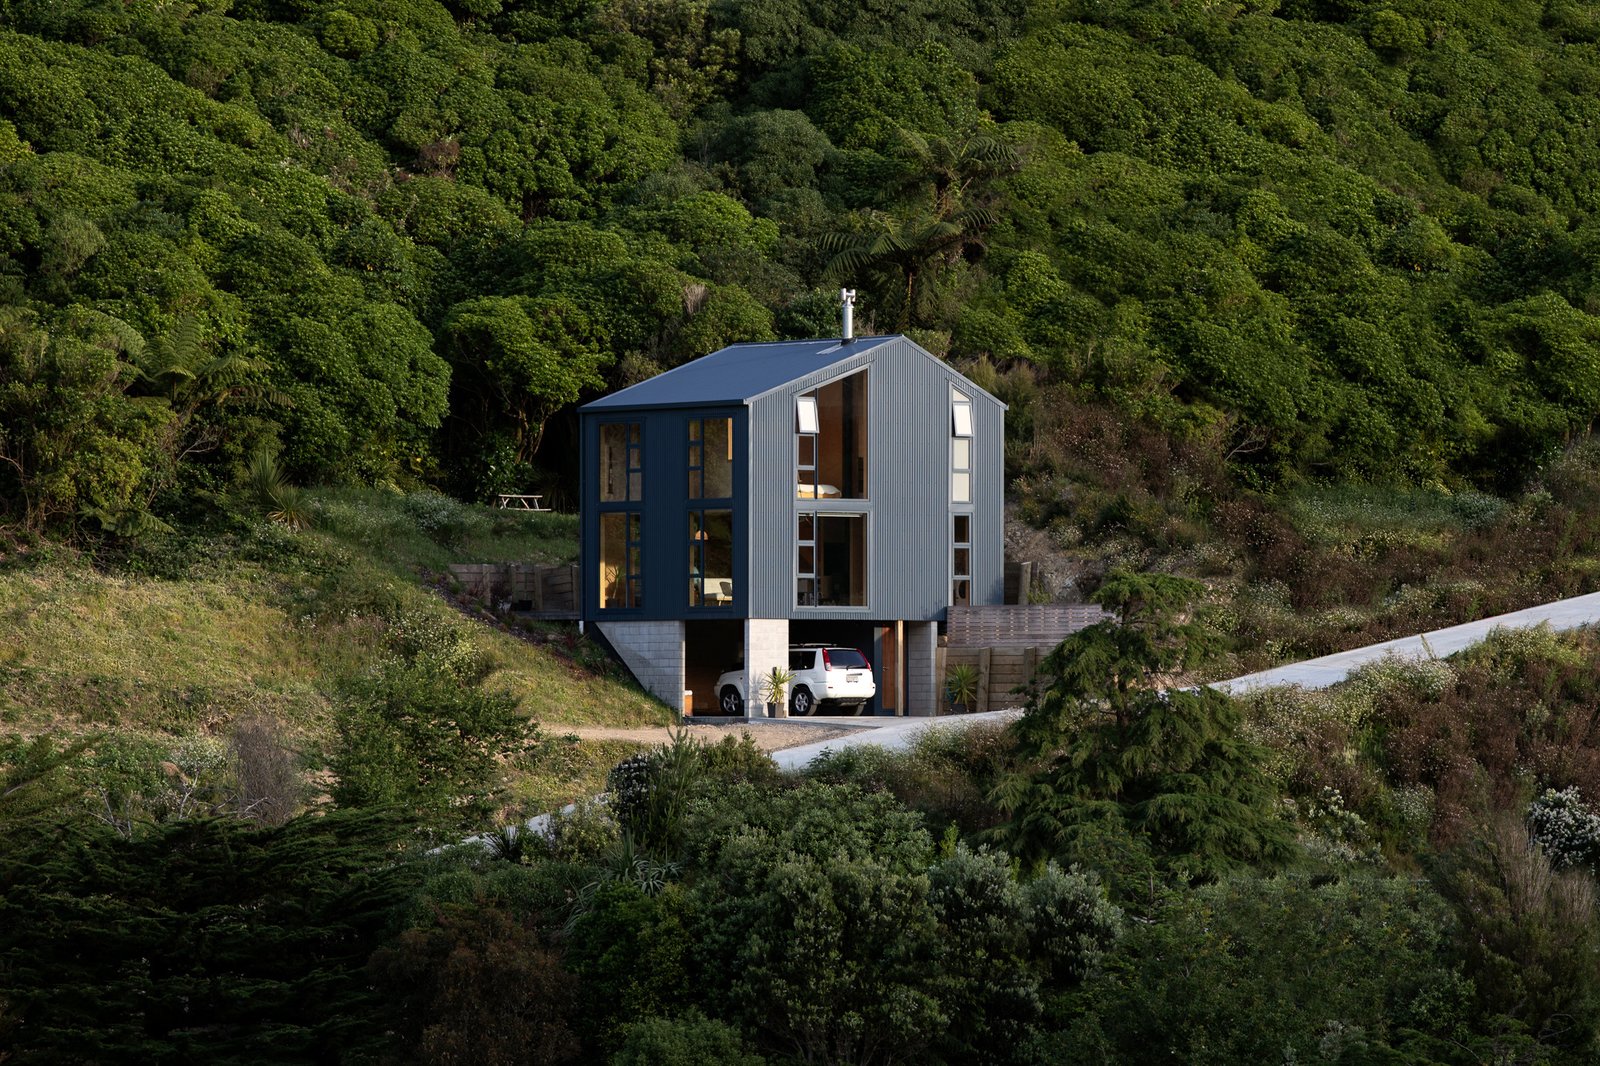 This Small New Zealand House Makes Dazzling Effect With Low-Cost Materials